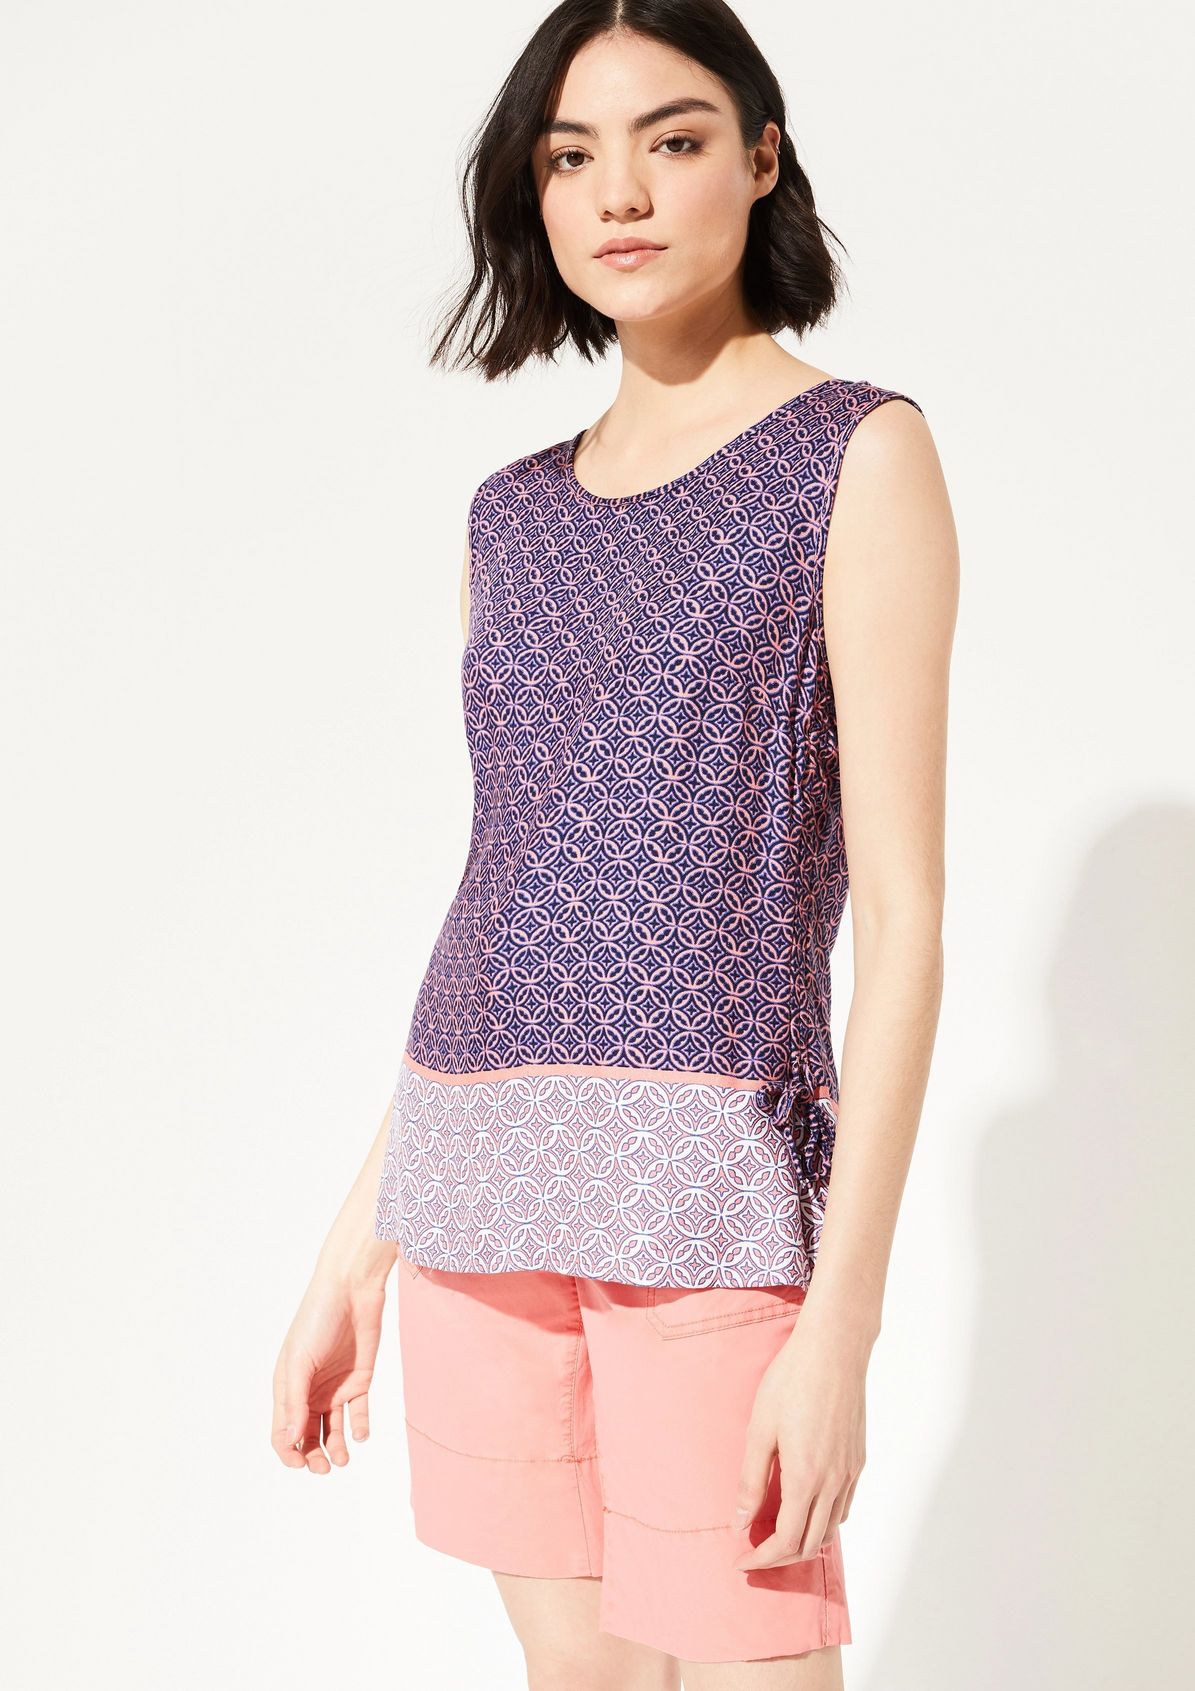 Drawstring blouse top from comma